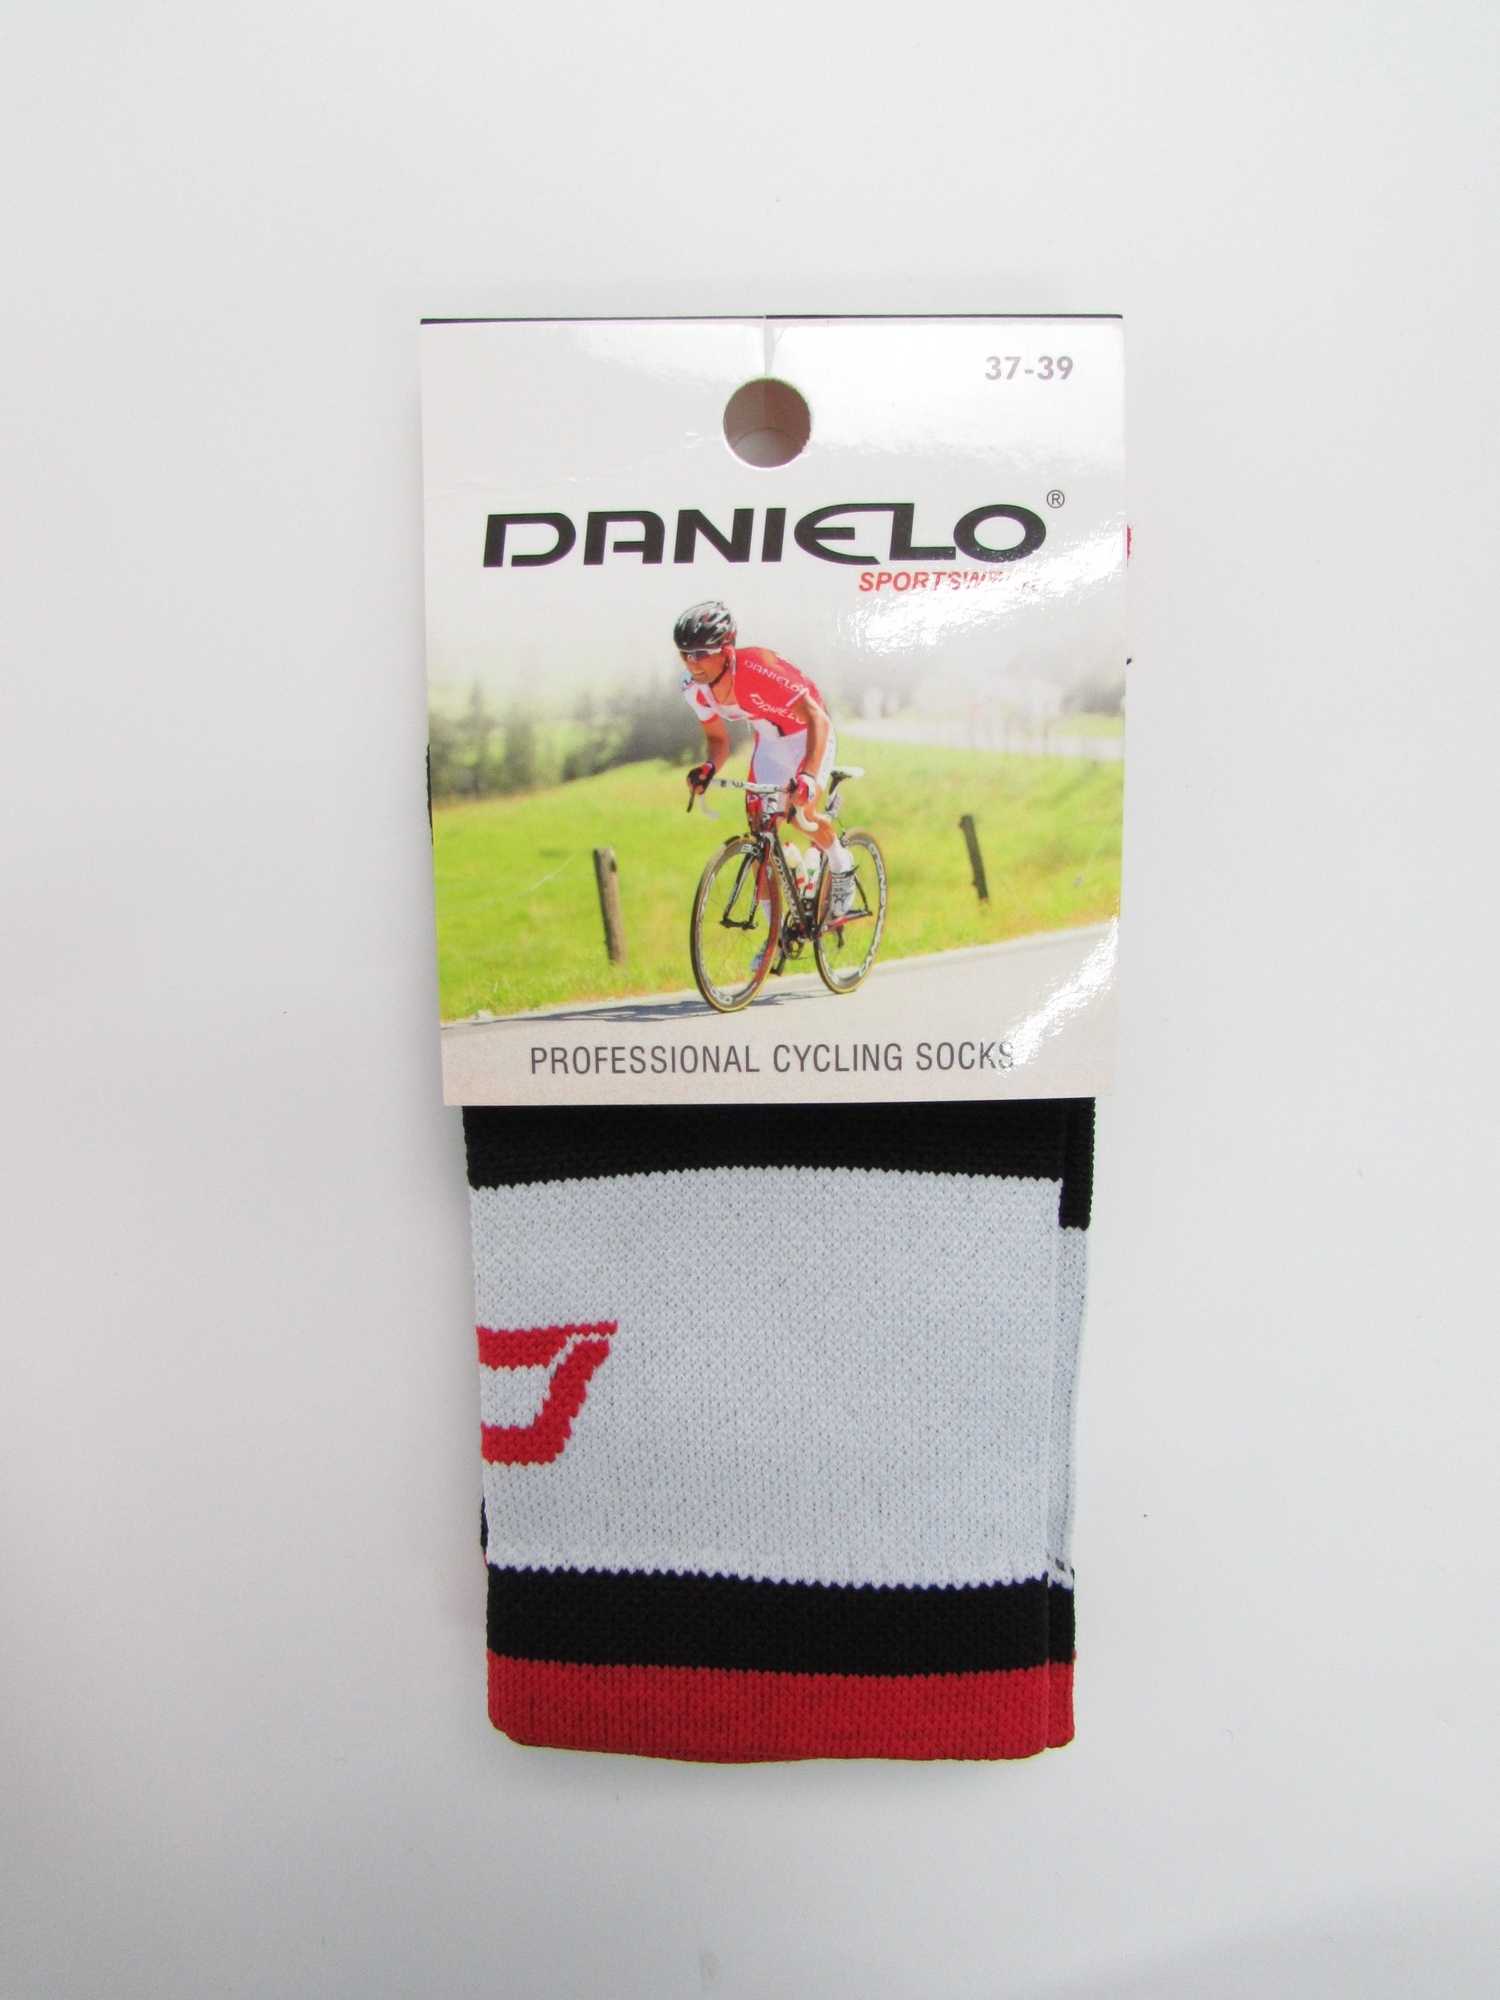 Danielo Professional Cycling Socks white/black/red size 37-39 (S)